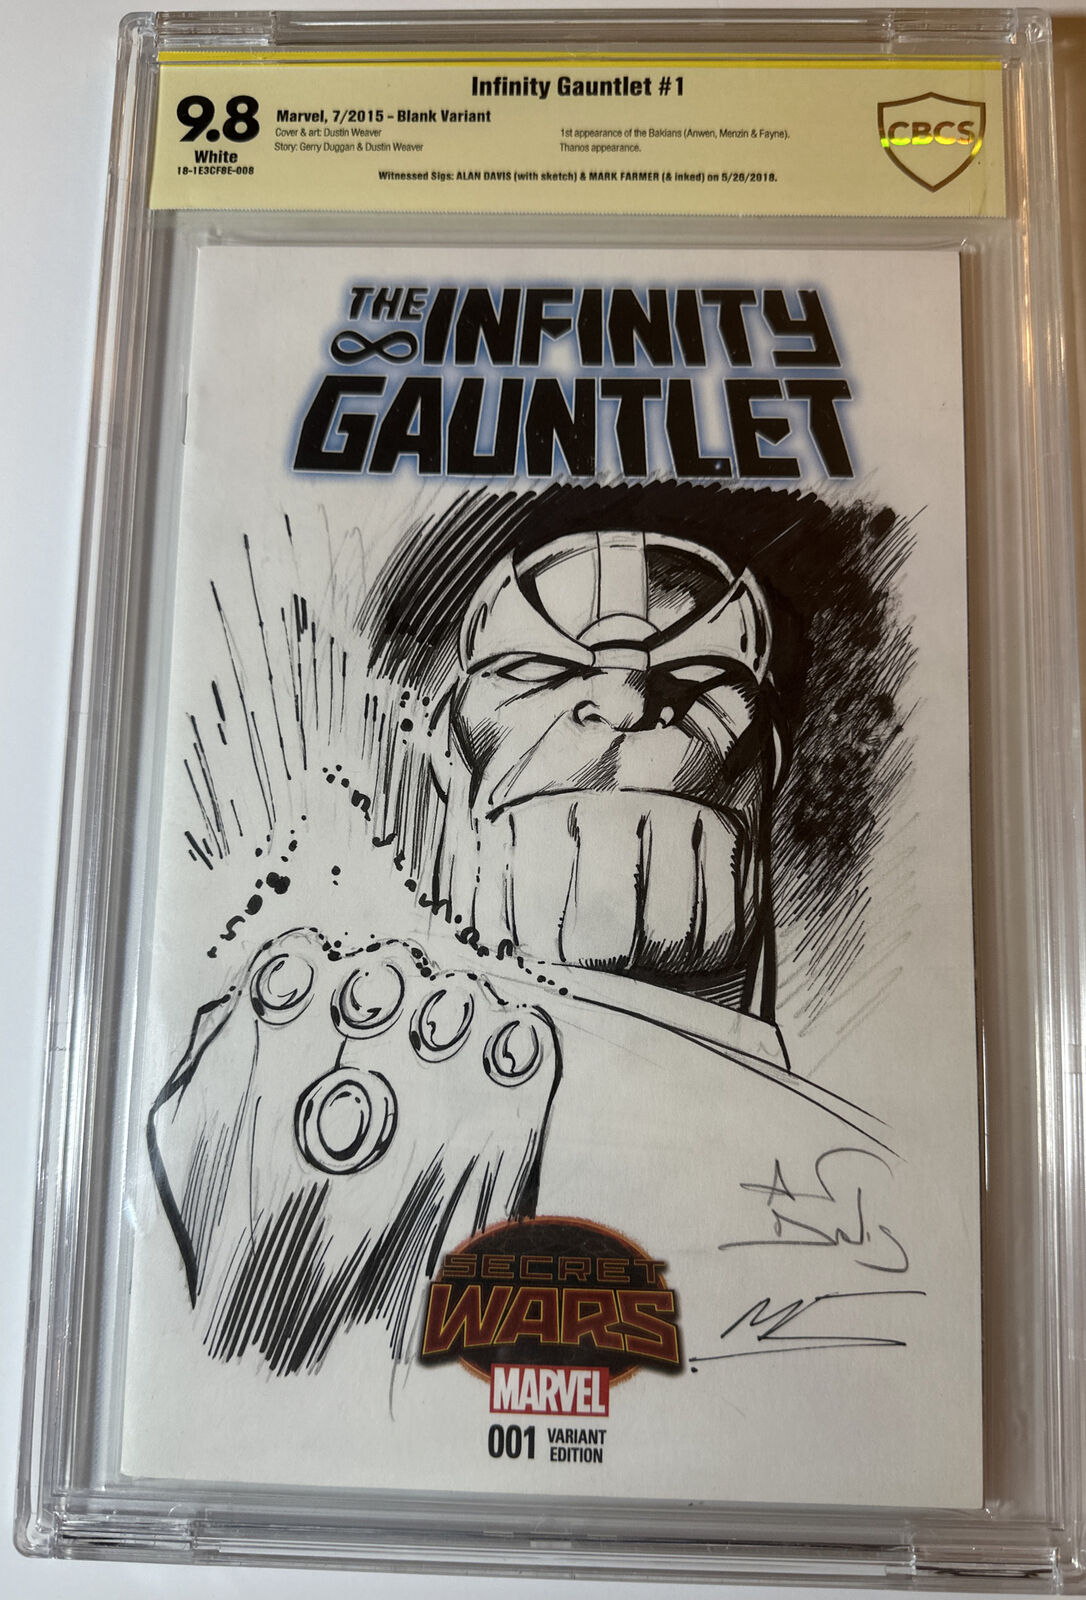 Infinity Gauntlet #1 CBCS 9.8 Signed and Sketched By Alan Davis and Mark Farmer